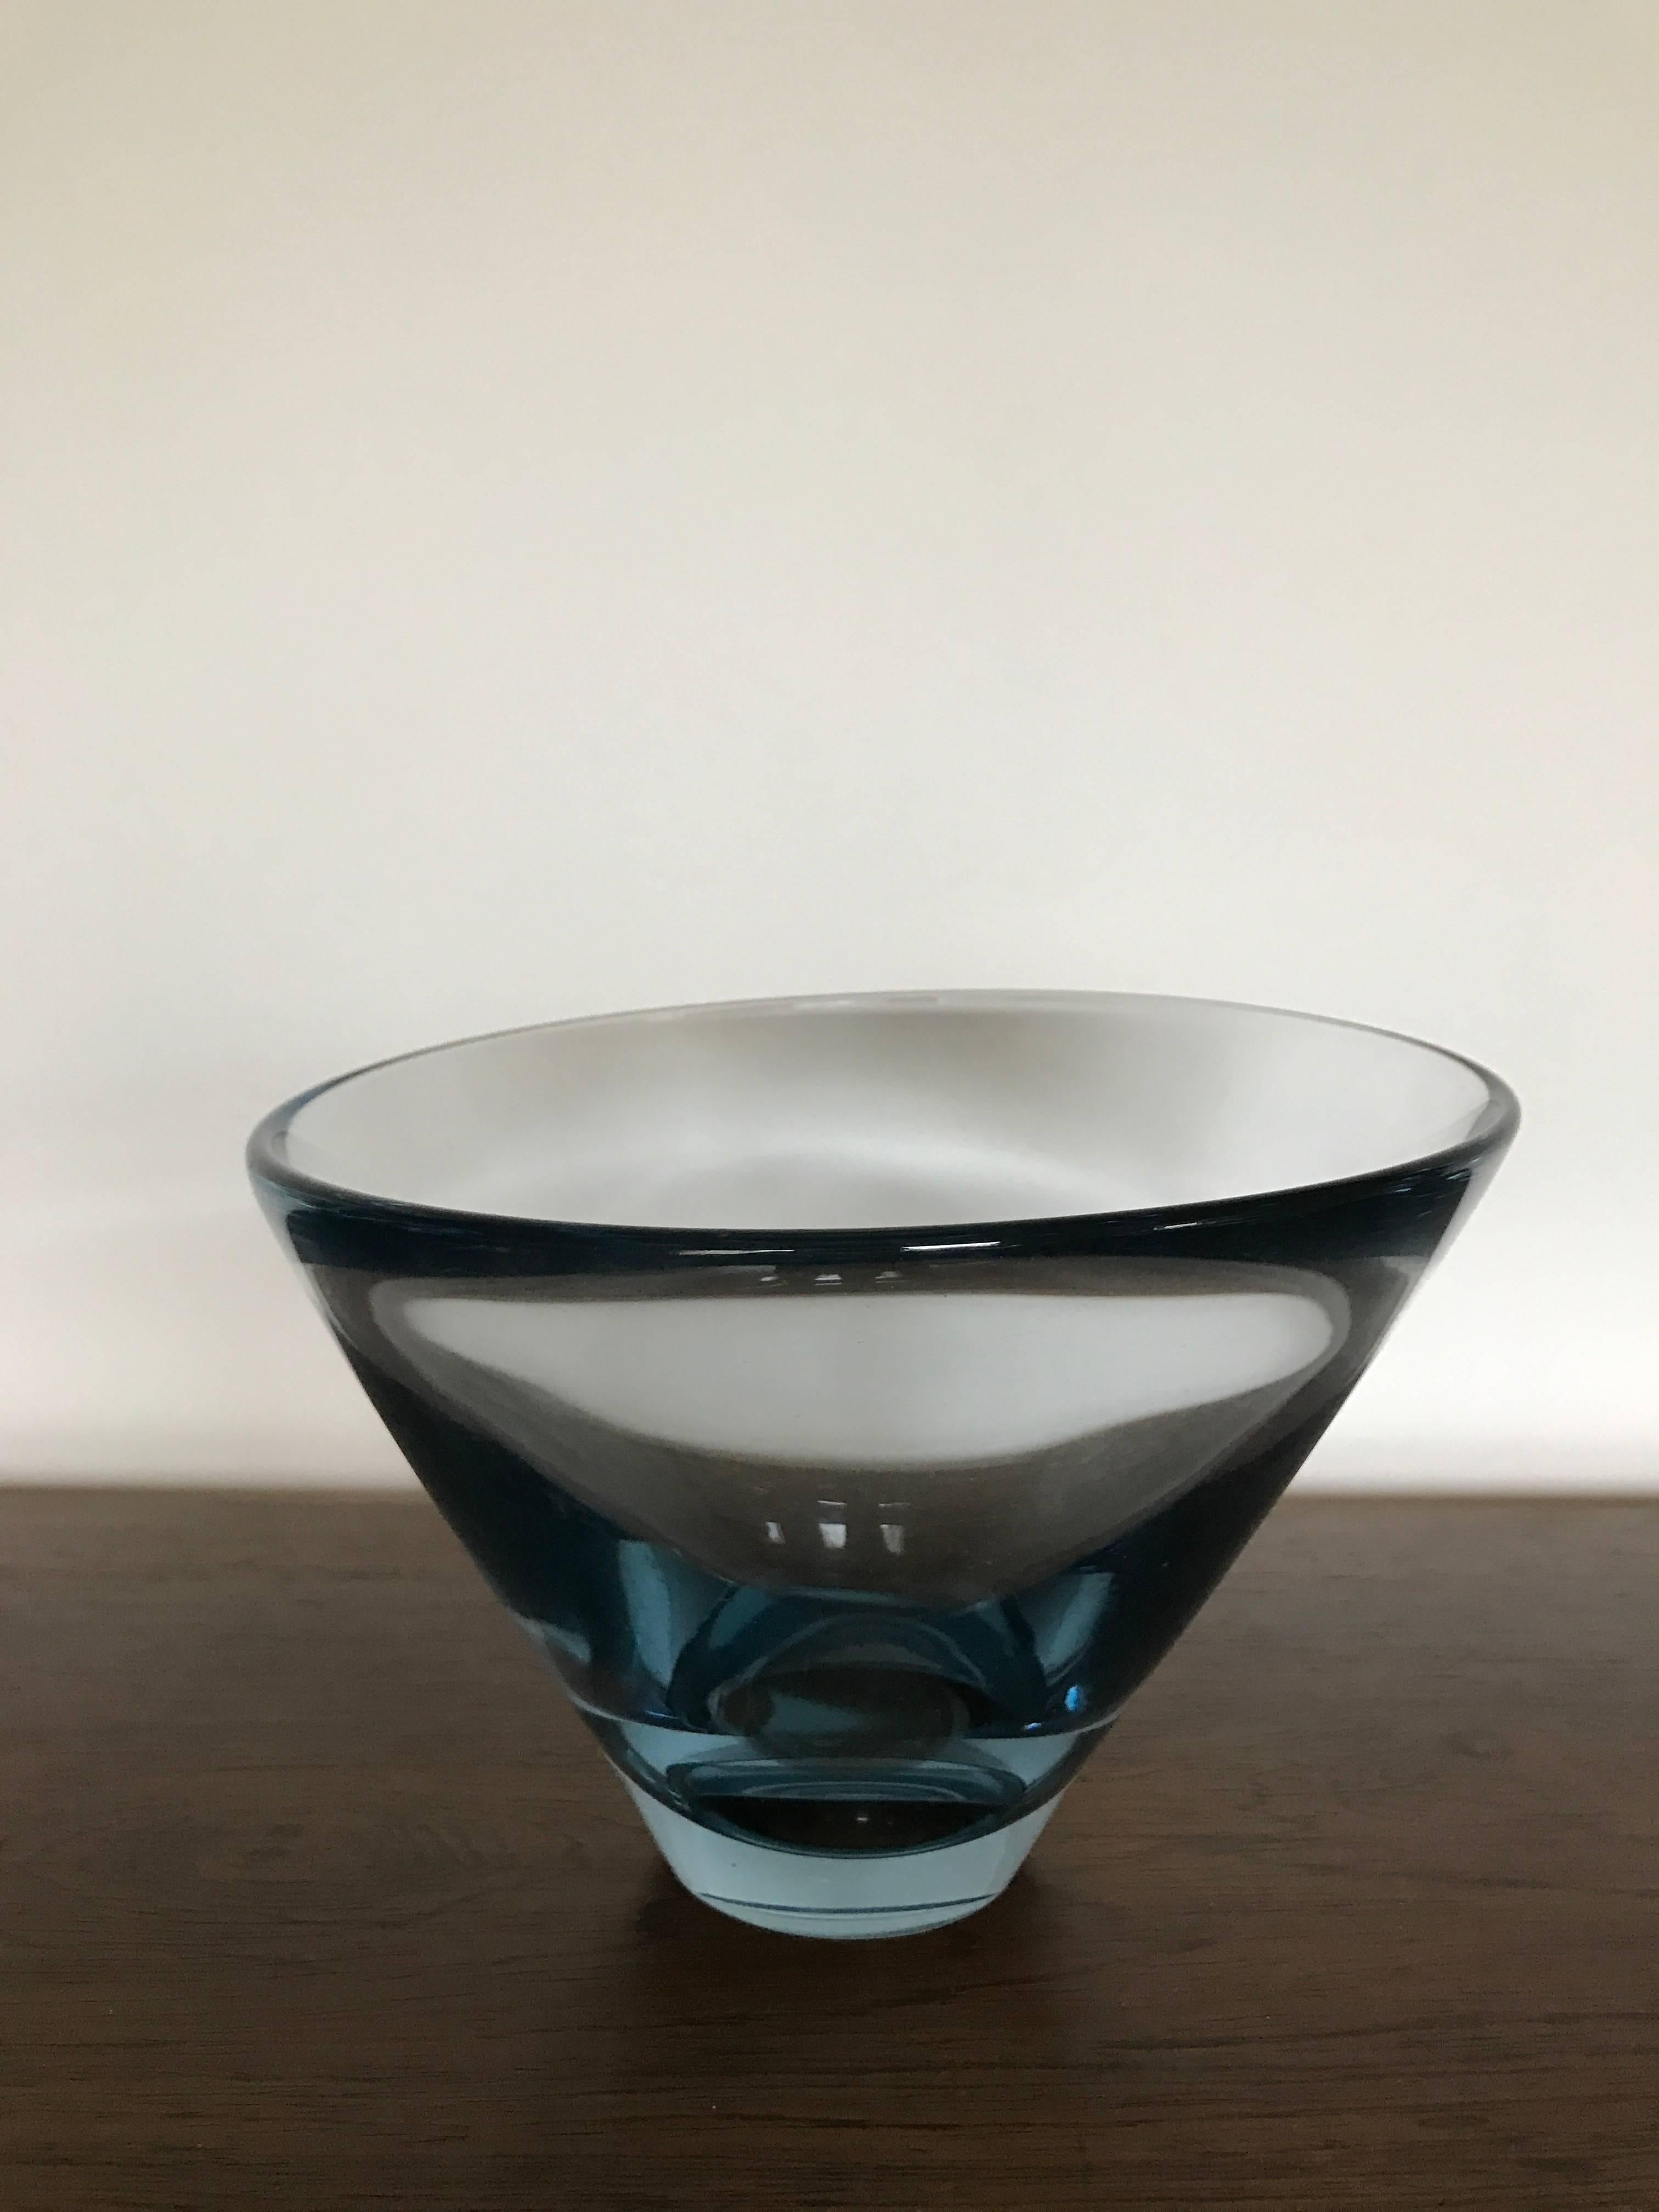 Large glass bowl from Holmegaard, designed by Per Lütken, Denmark, 1960s. Measures: Diameter 23 cm, height 15 cm. Very good condition.